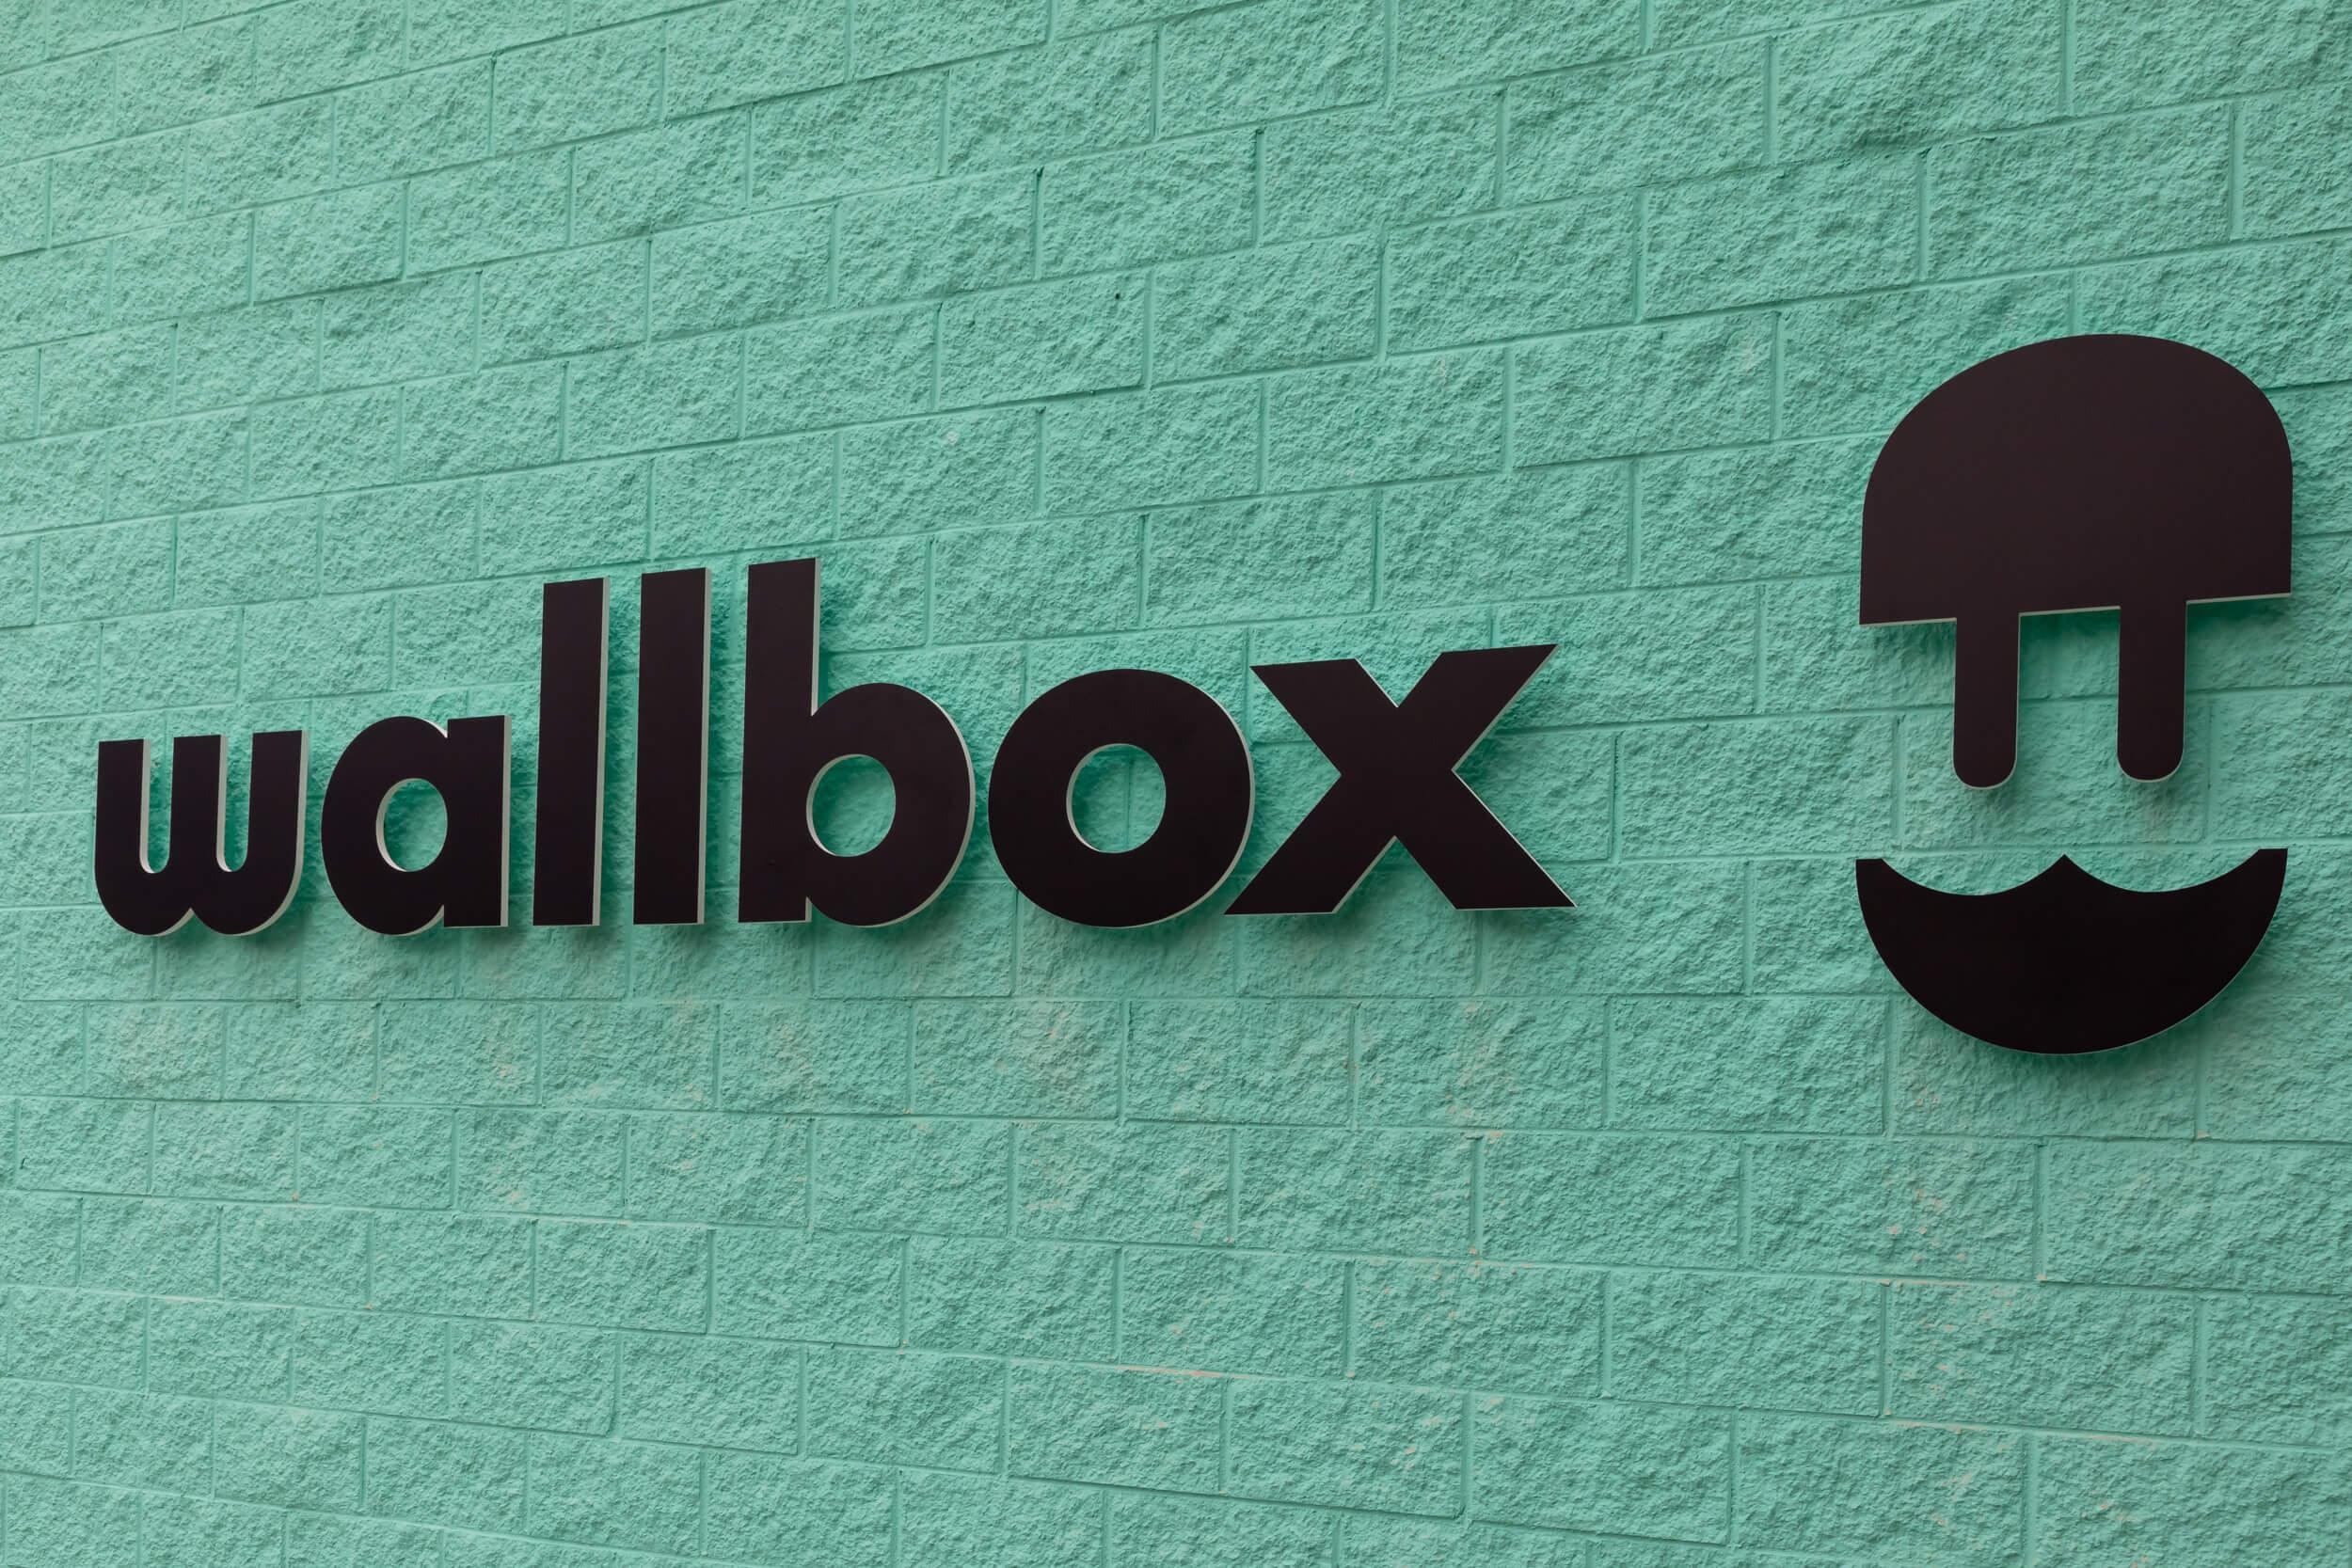 Wallbox announces timing of its First Quarter 2022 Financial Results and Conference Call